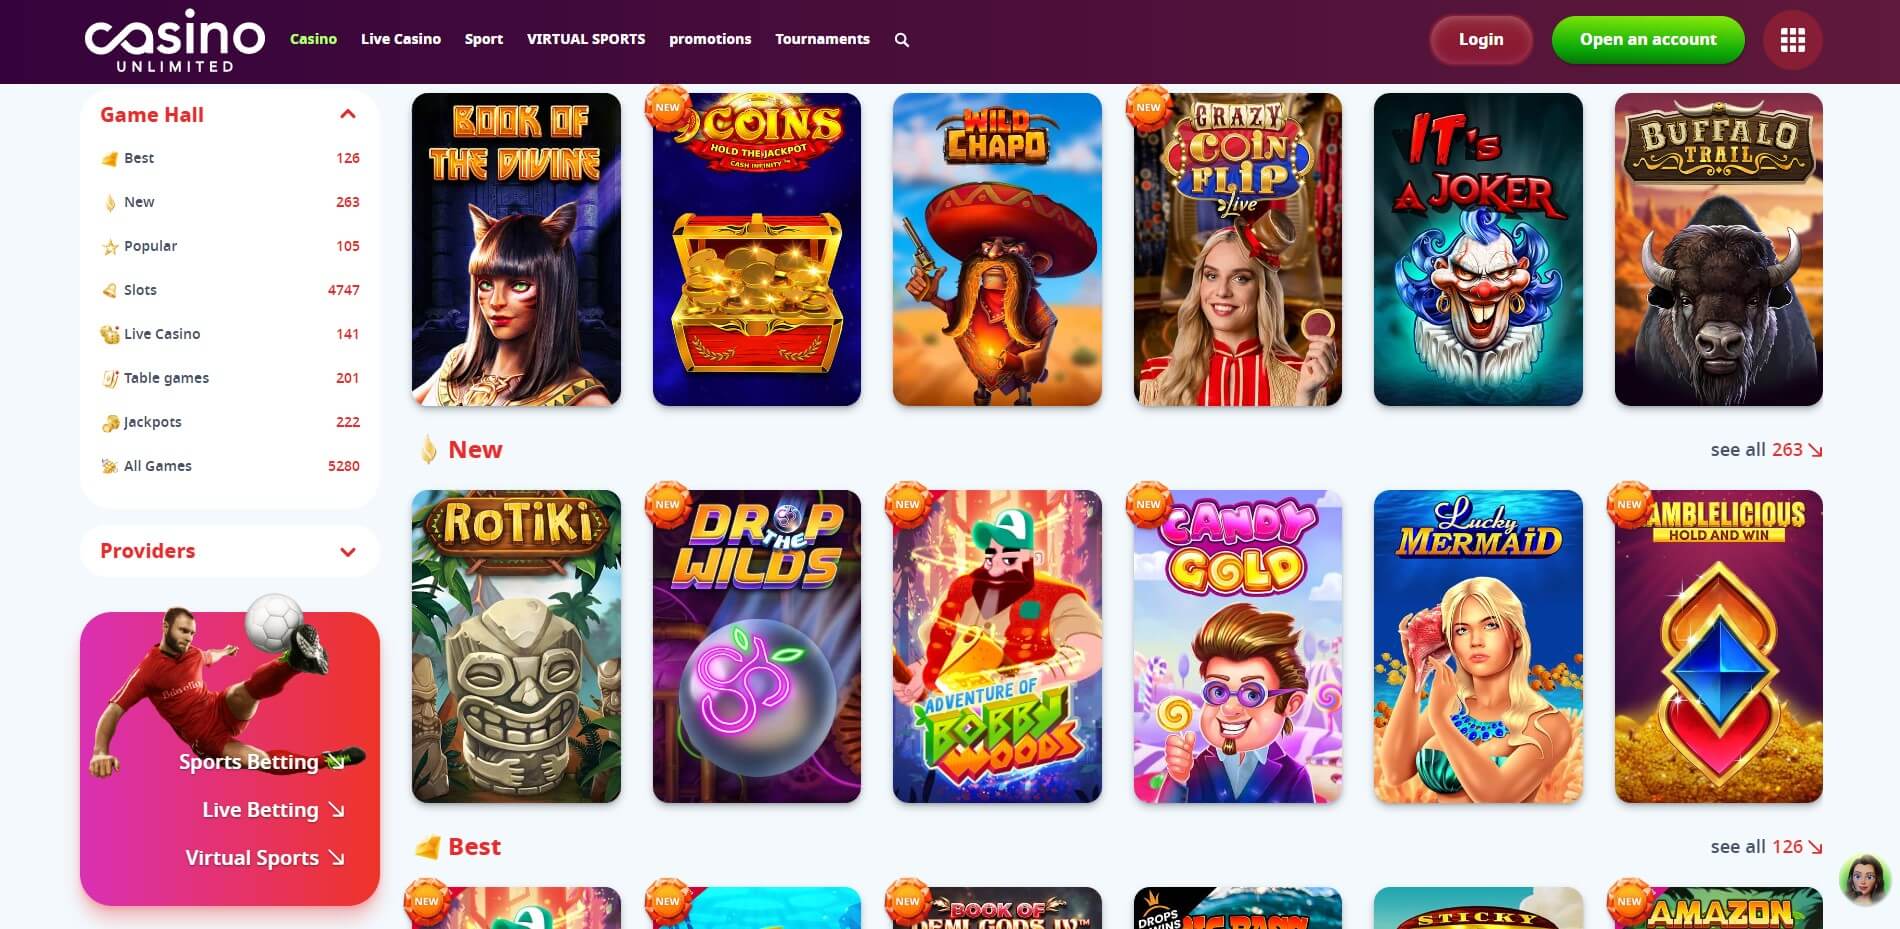 Casino Unlimited Games